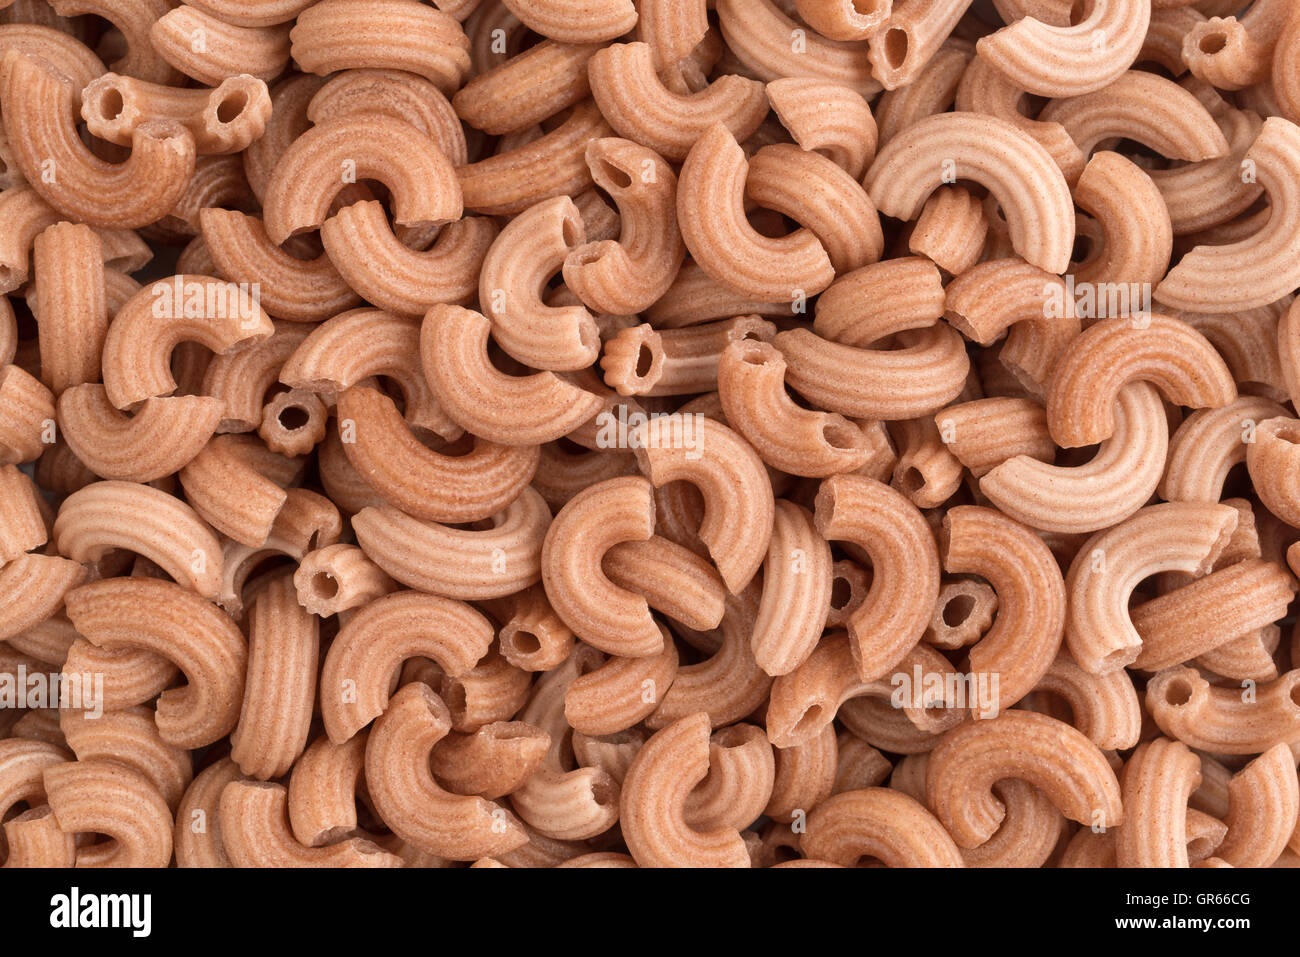 A very close view of red rice elbow shaped pasta. Stock Photo